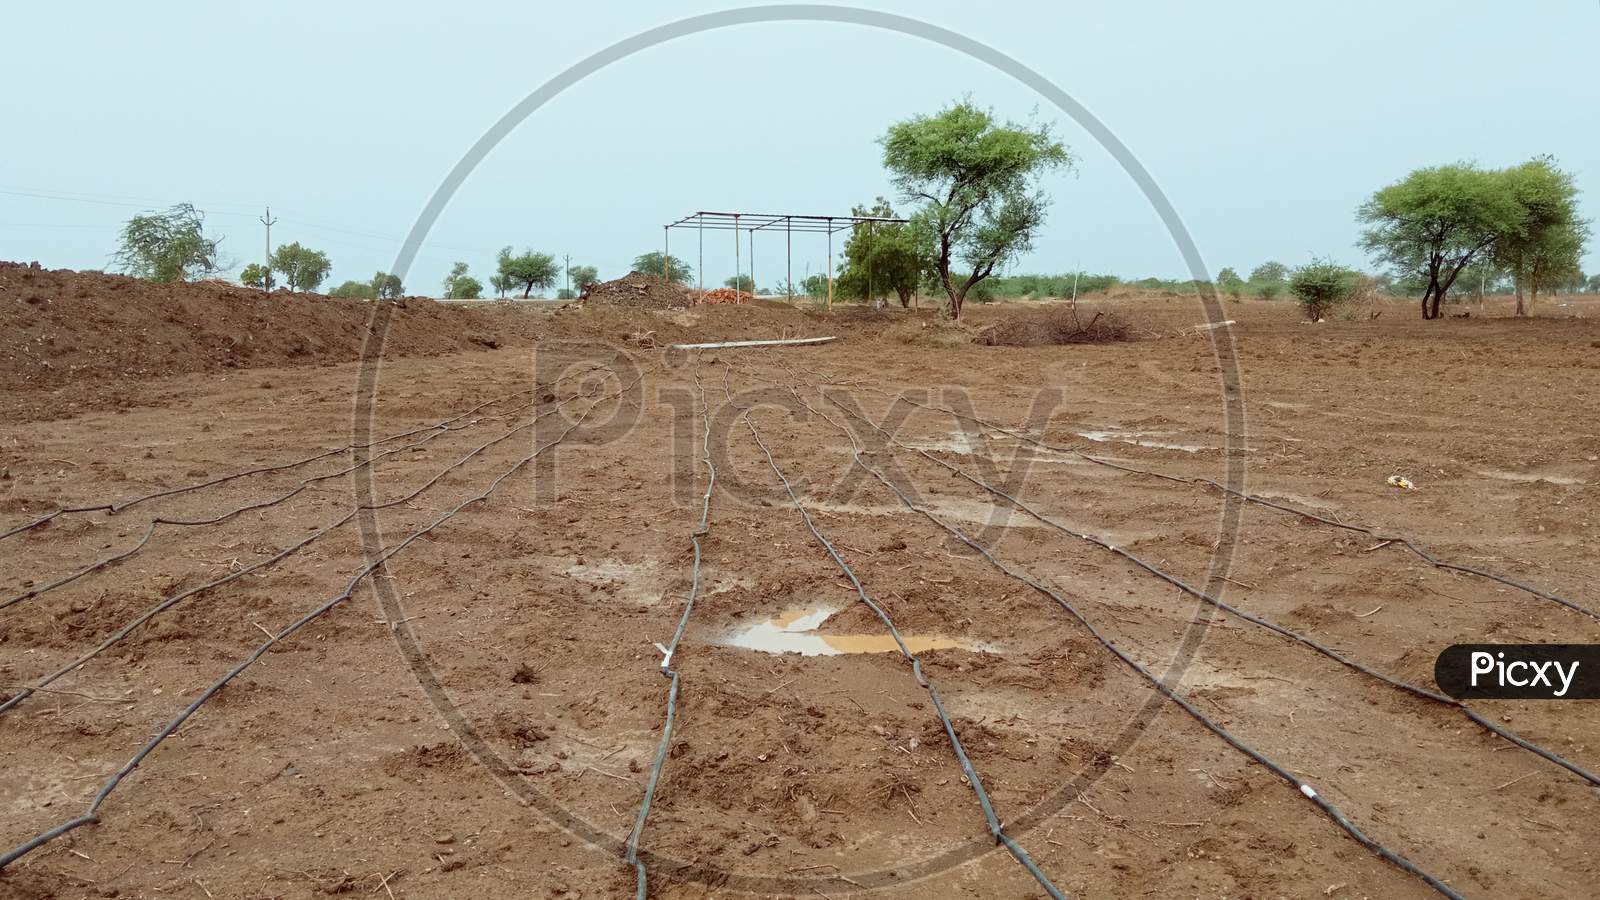 Pre monsoon preparation of drip irrigation system for sowing cotton seeds